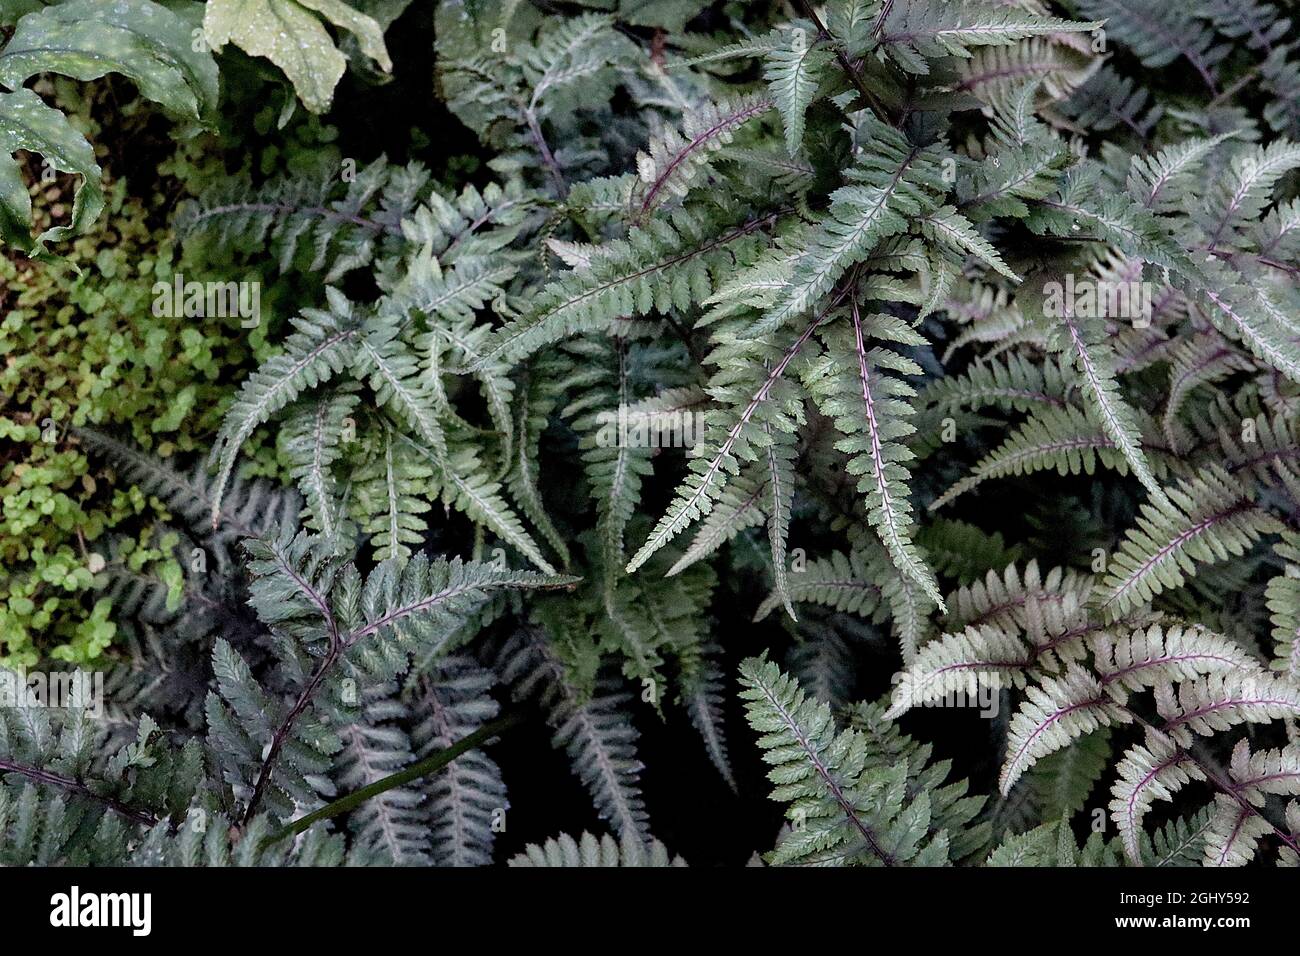 Athyrium niponicum var pictum ‘Silver Falls’ painted lady fern Silver Falls – grey green bipinnate fronds with silver flush, purple red midribs, Stock Photo